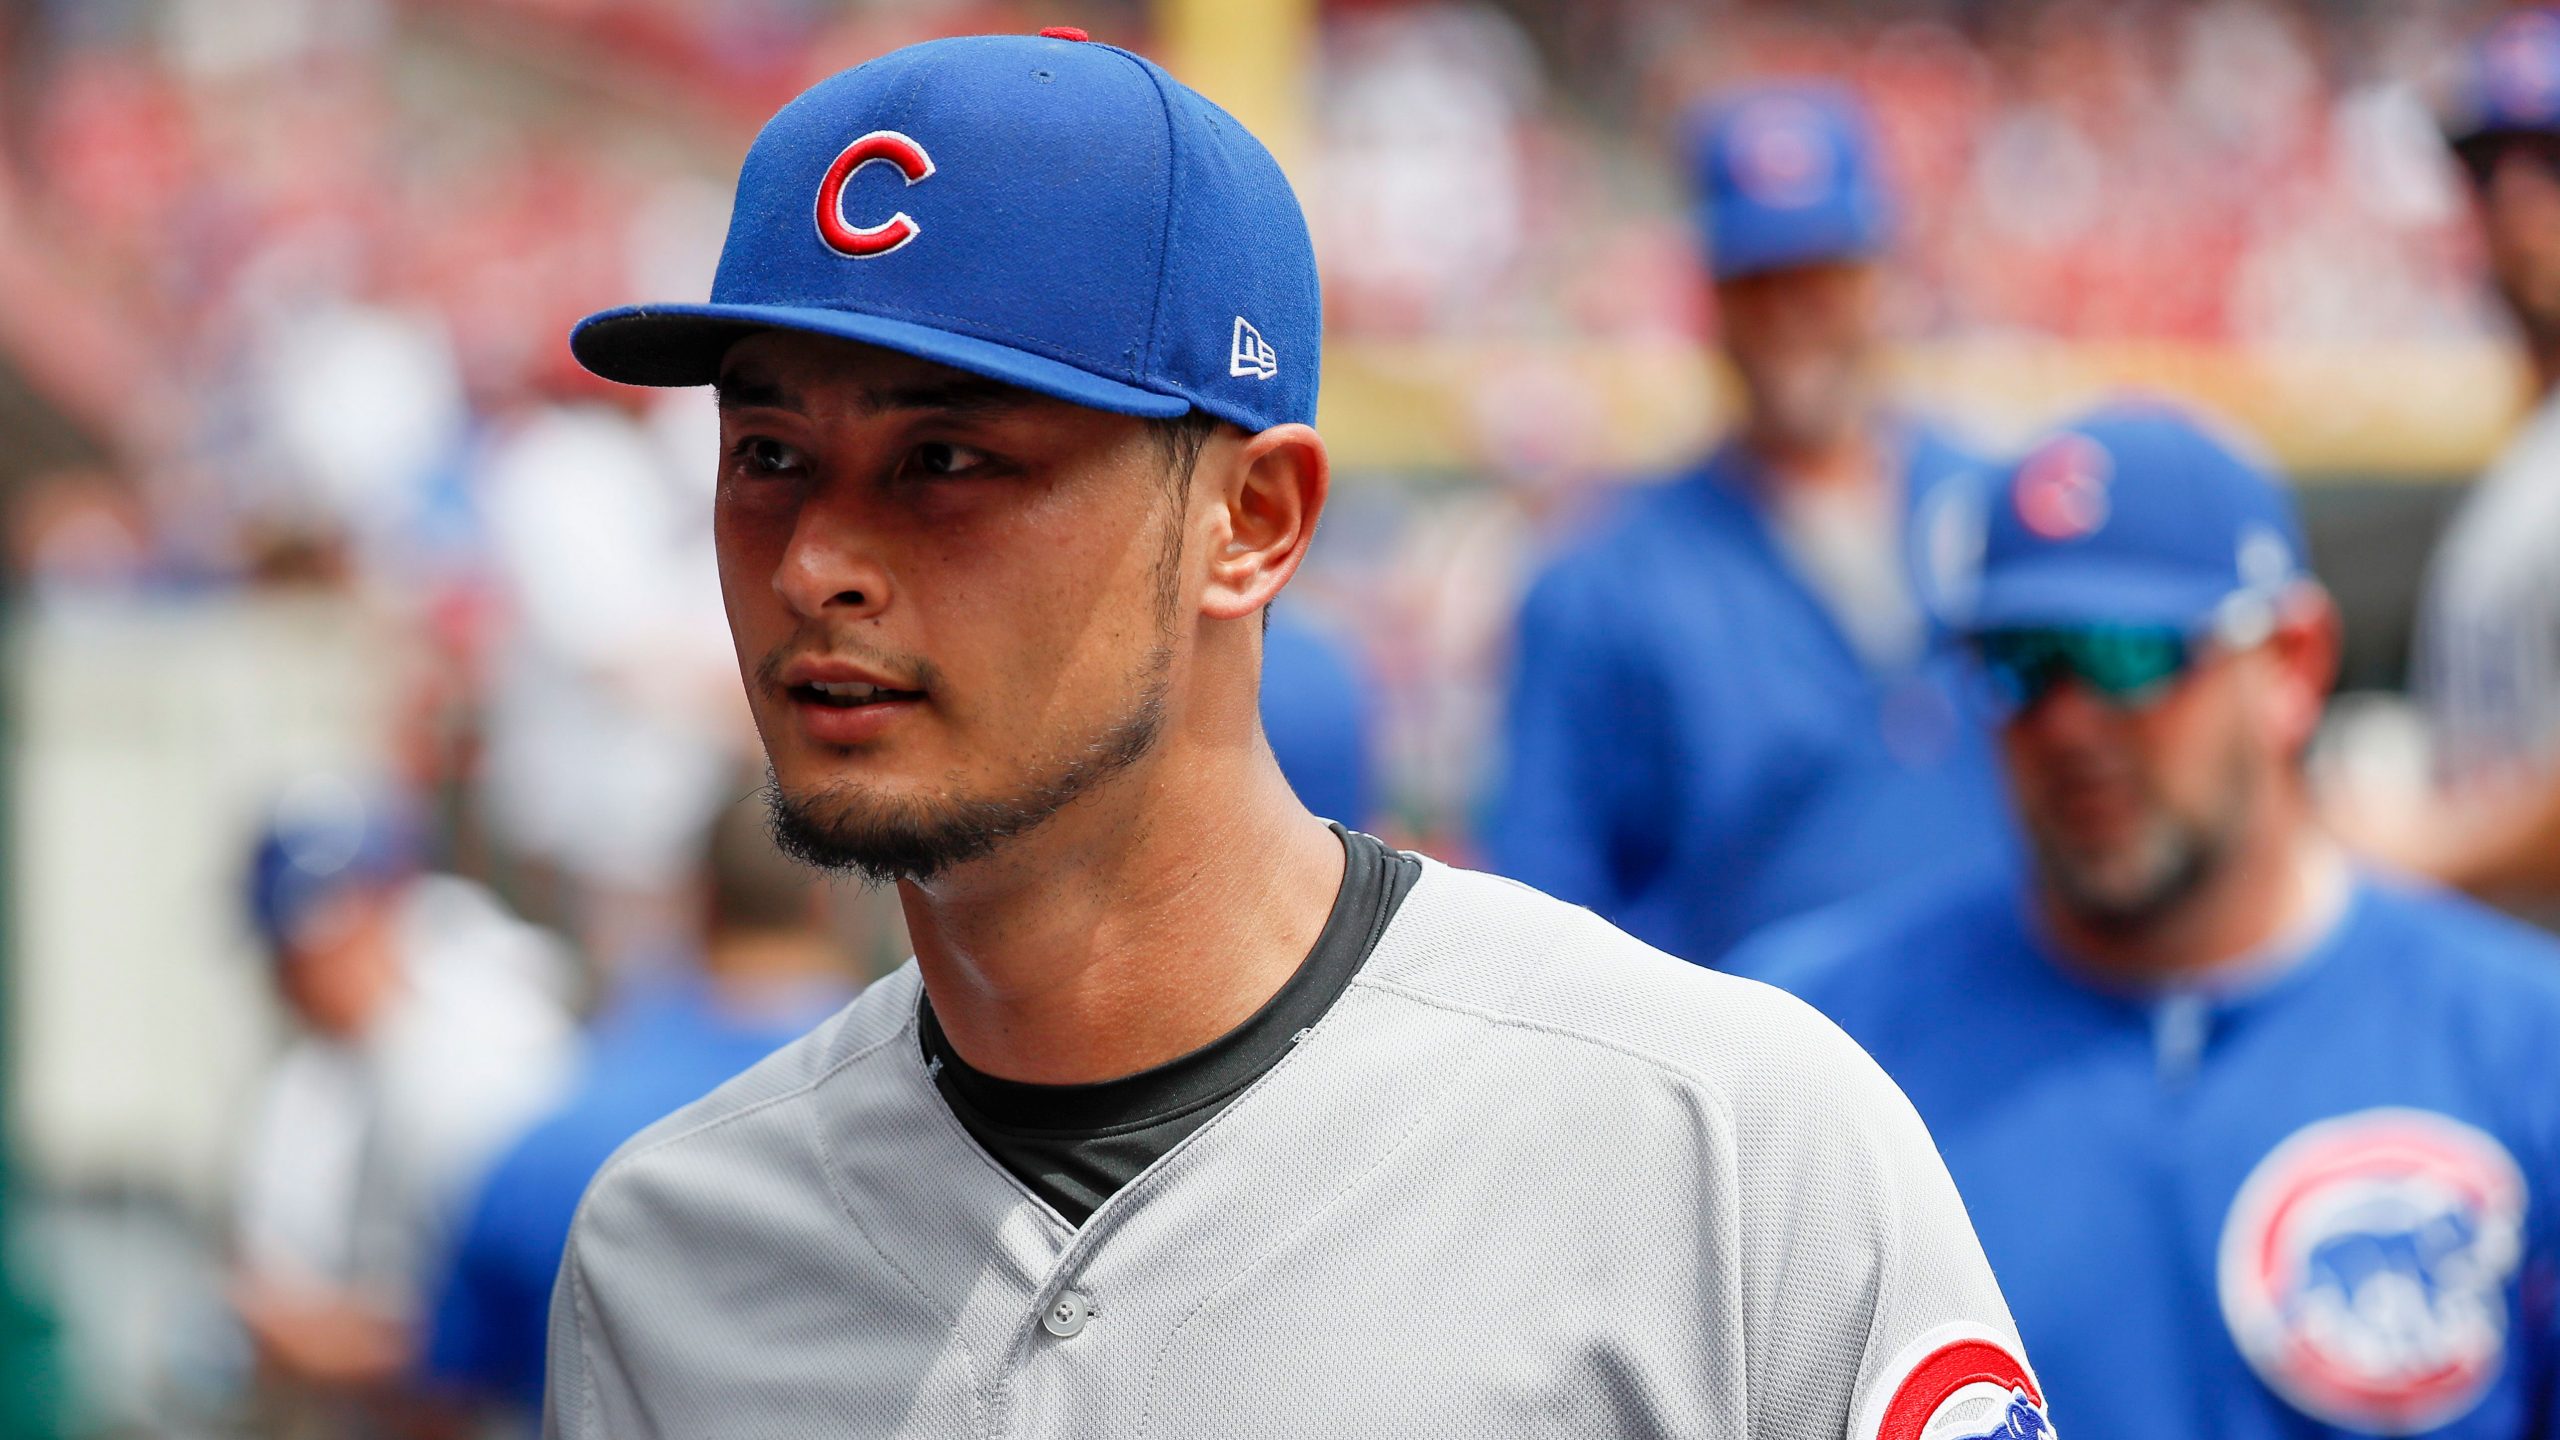 Backed by HRs, Darvish beats Reds for 1st win with Cubs